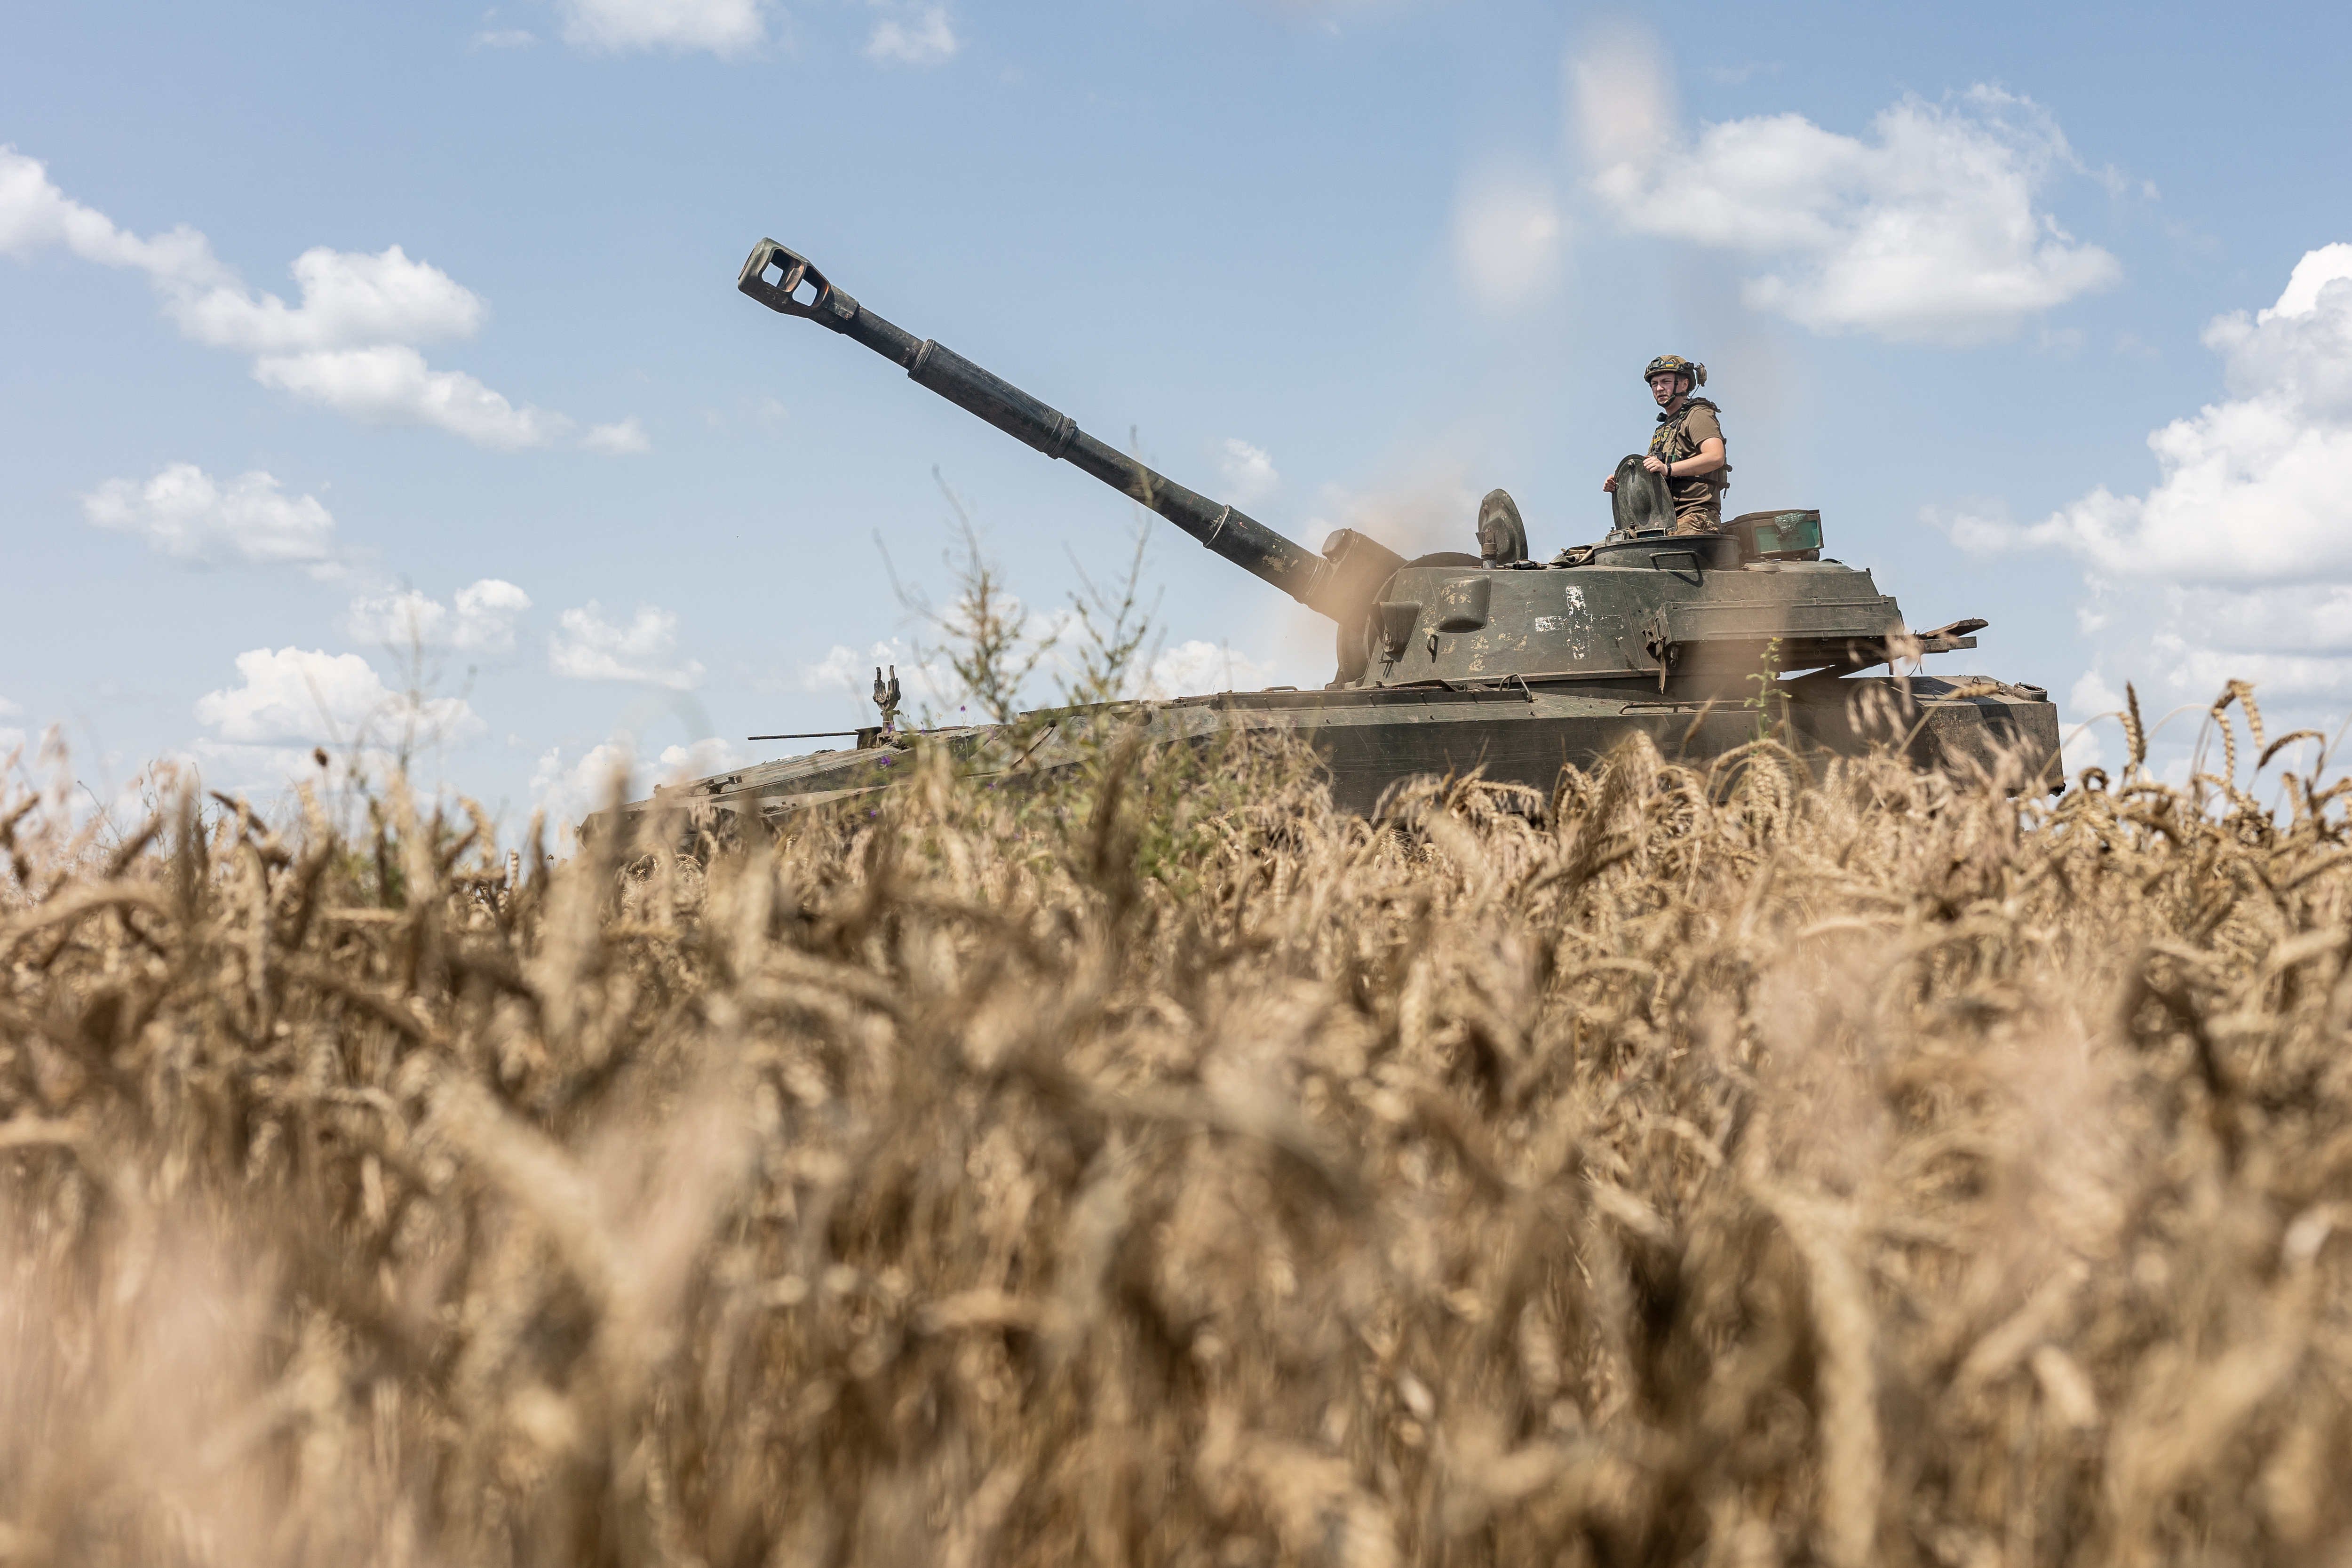 A Ukrainian soldier of the 72nd Brigade sits on a tank in the direction of Vuhledar village in Donetsk Oblast, Ukraine